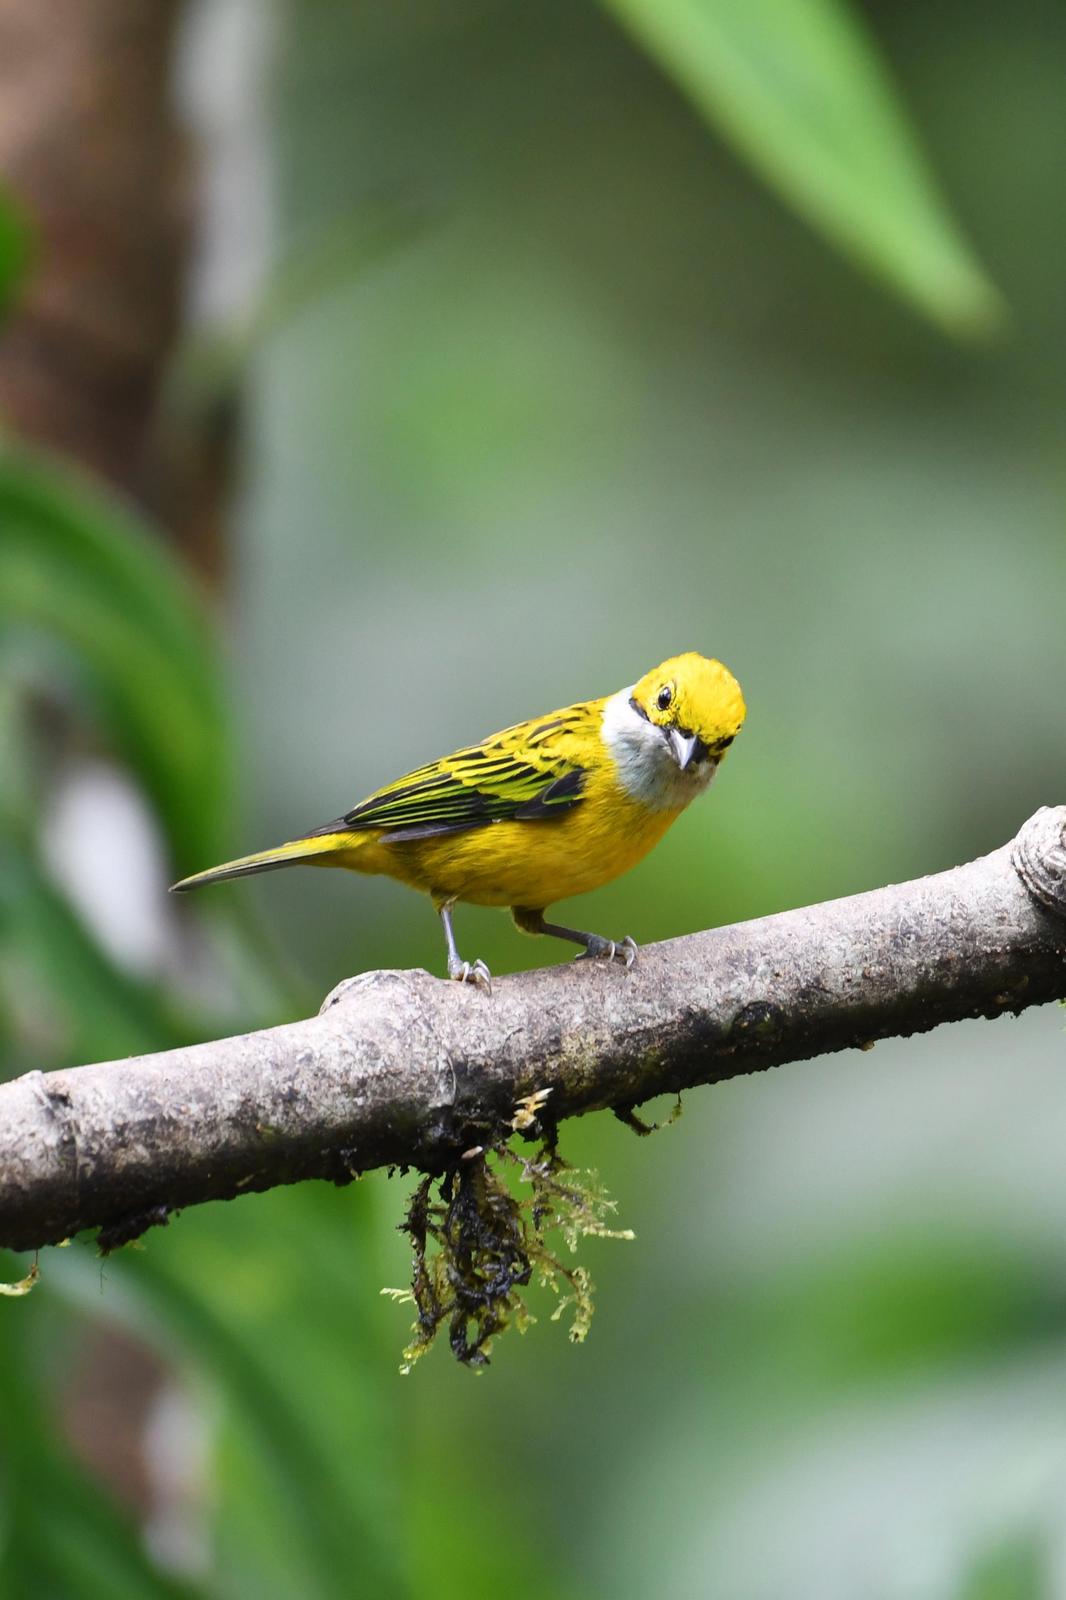 Silver-throated Tanager Photo by Ann Doty